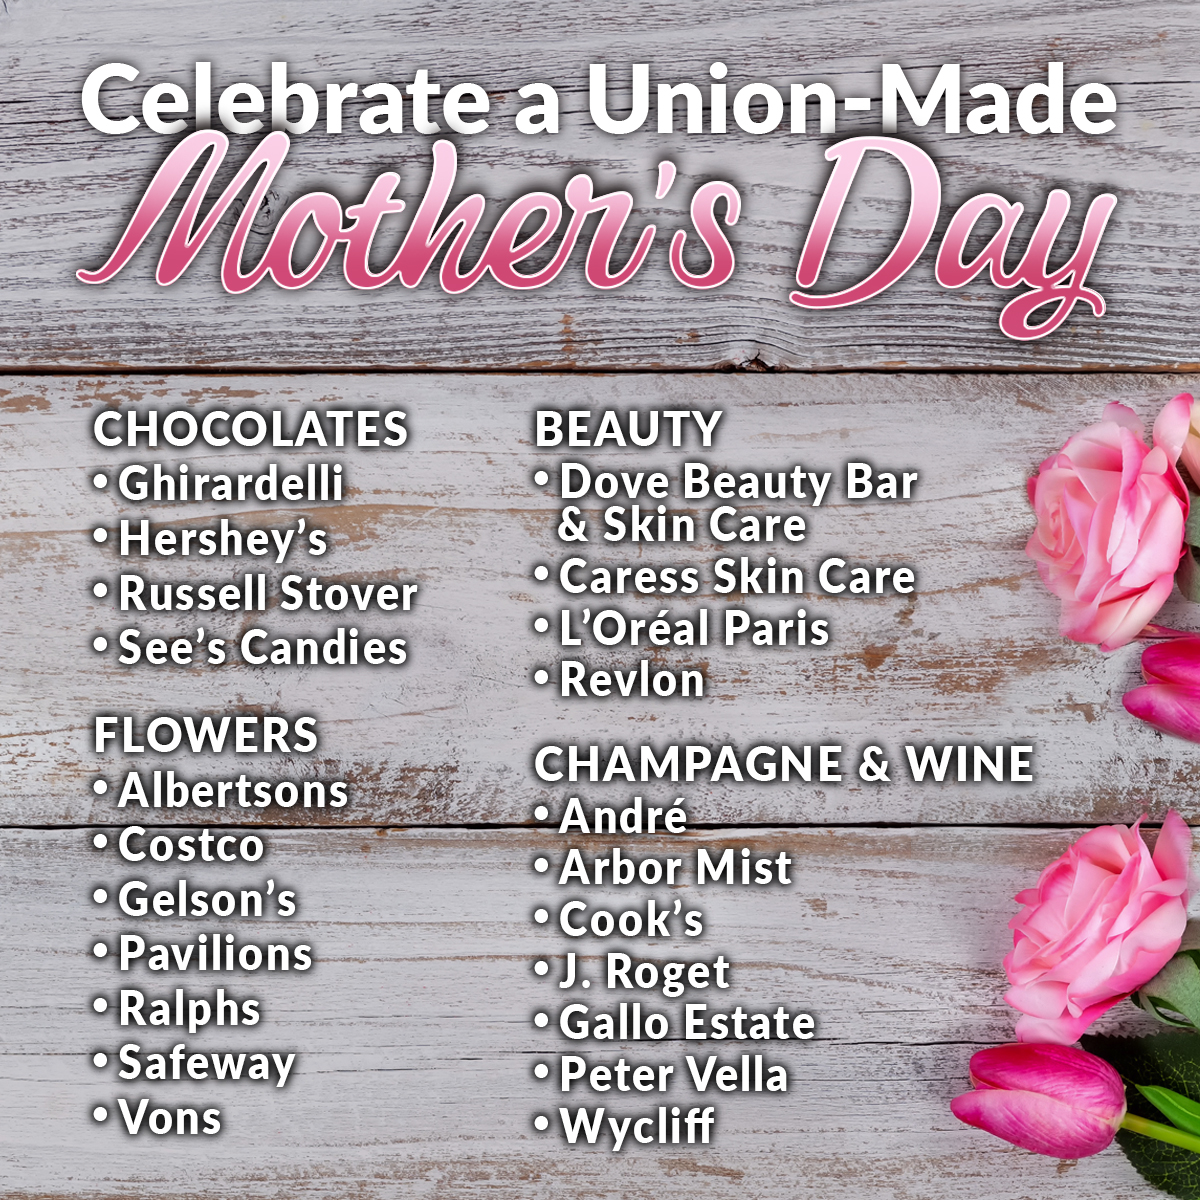 Just a helpful reminder that this Sunday is Mother's Day. Get the mom in your life a gift that she deserves, and always make sure it's #UnionMade! 💐💎🍾

#LIUNA #MothersDay #MothersDay24 #MD24 #Mom #Mother #Gift #GiftIdeas #Flowers #Chocolate #Wine #UnionWorkers #Union